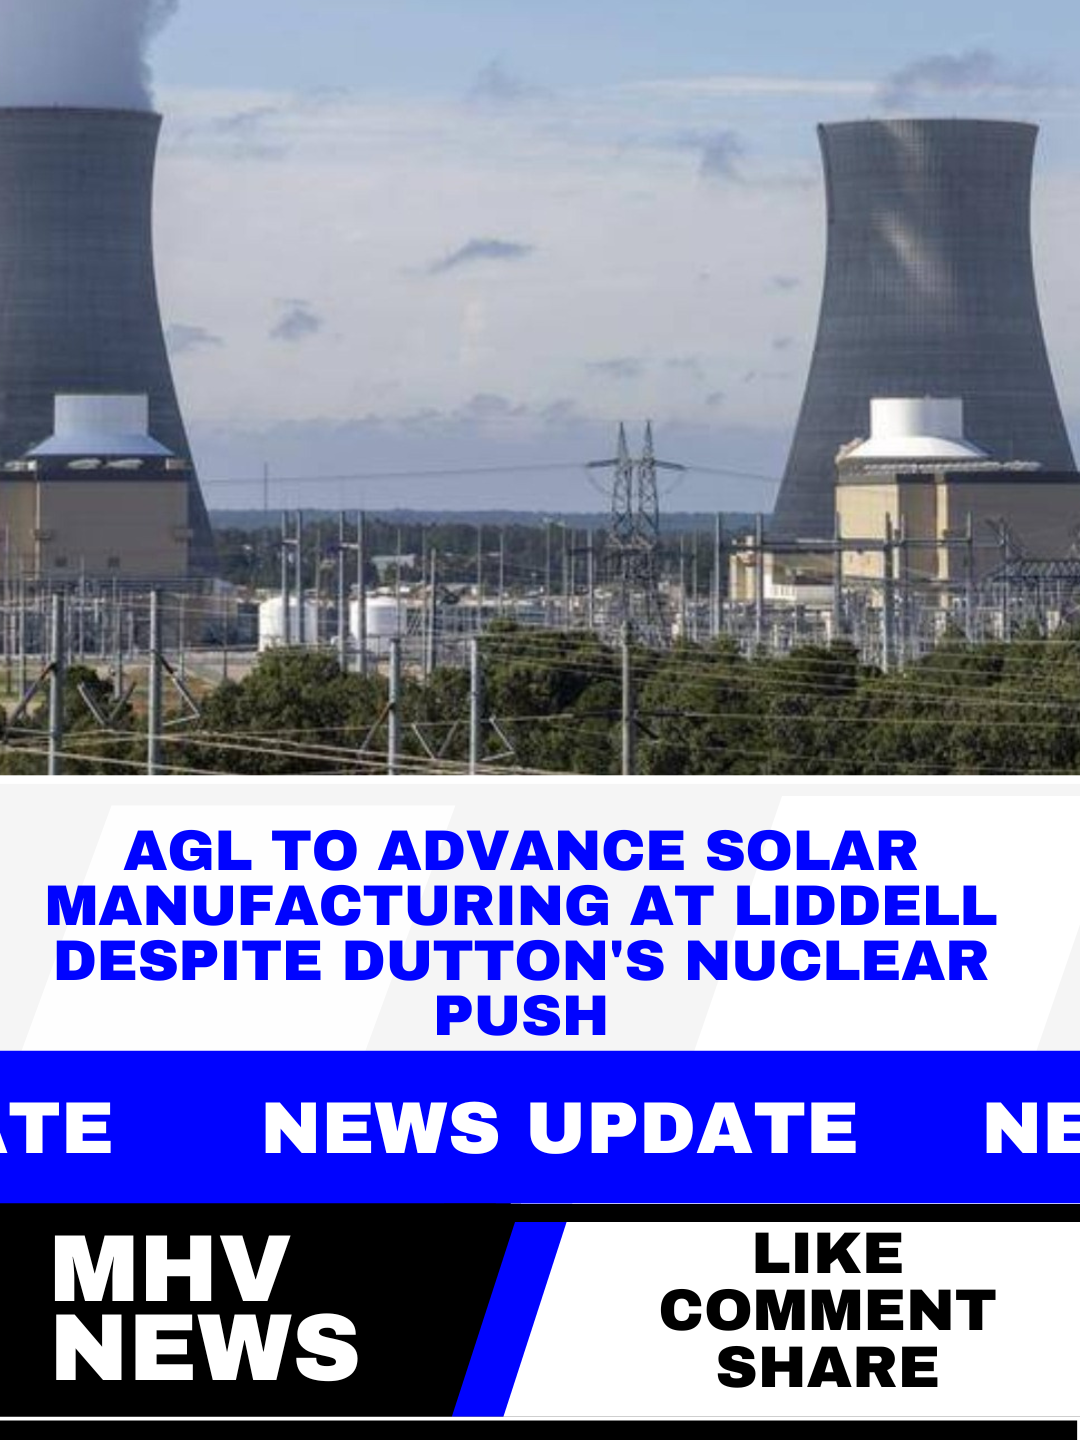 AGL to Advance Solar Manufacturing at Liddell Despite Dutton's Nuclear Push